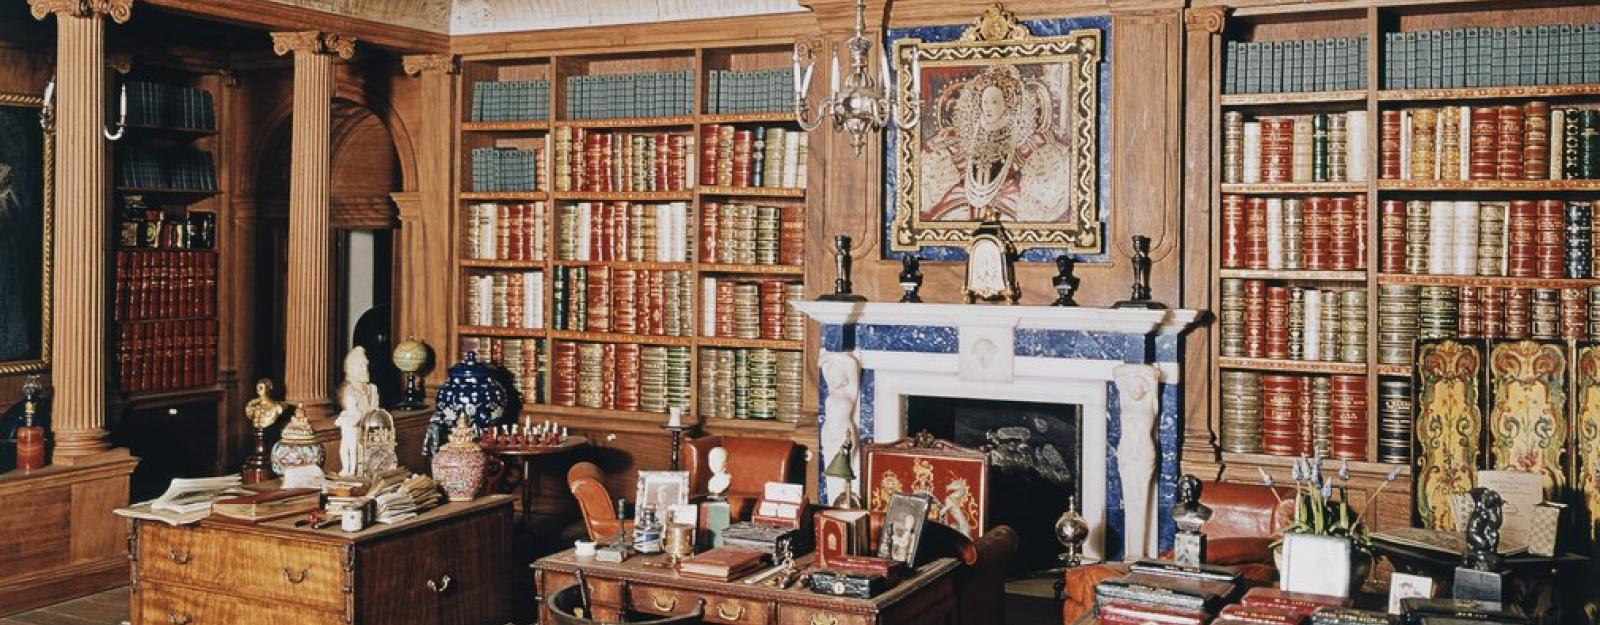 View of the inside of the library in Queen Mary's dolls house